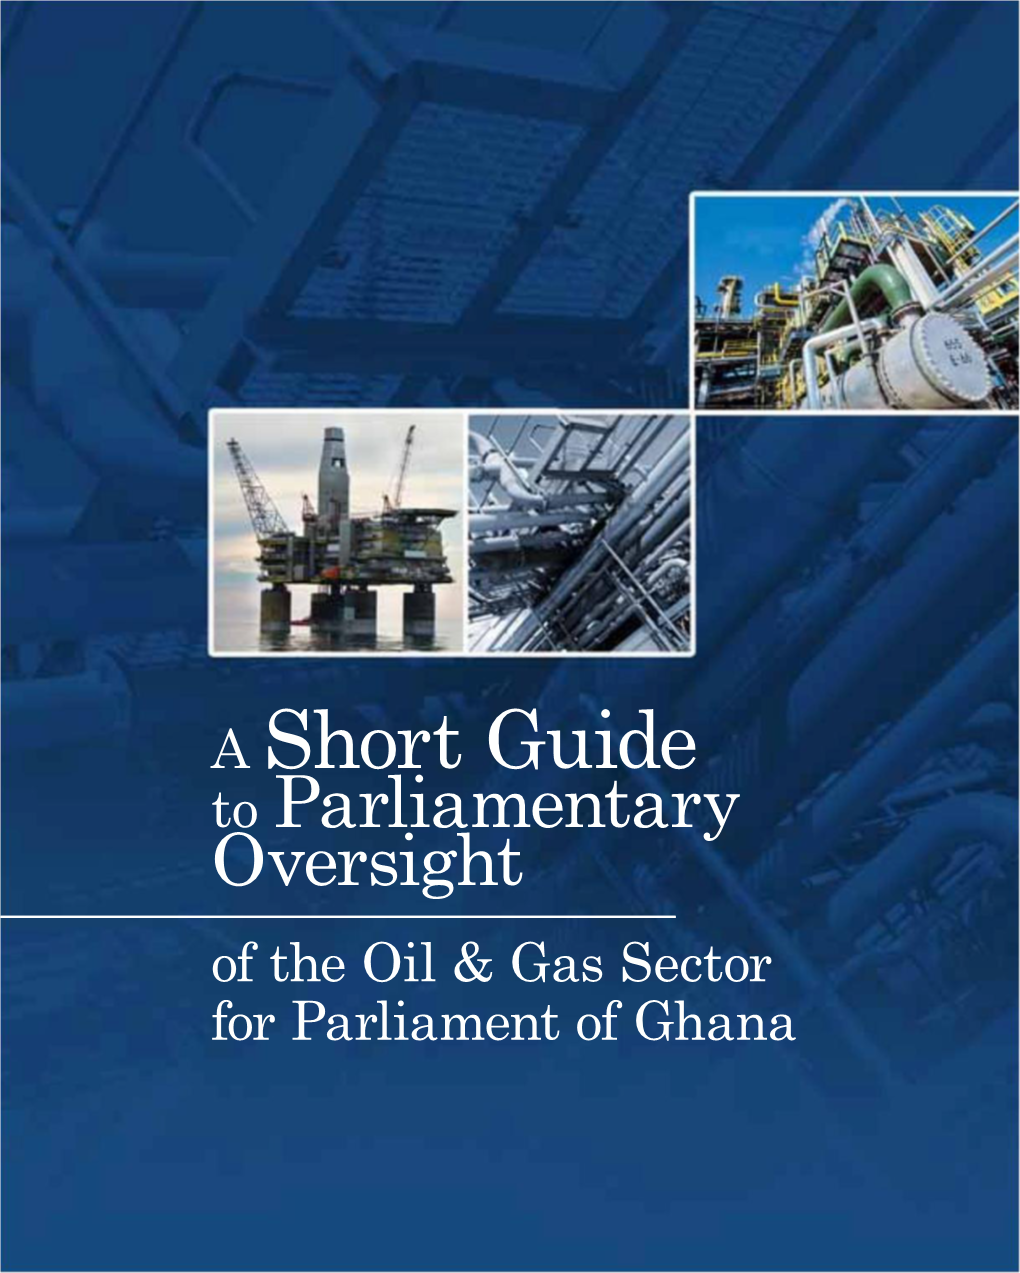 Of the Oil & Gas Sector for Parliament of Ghana